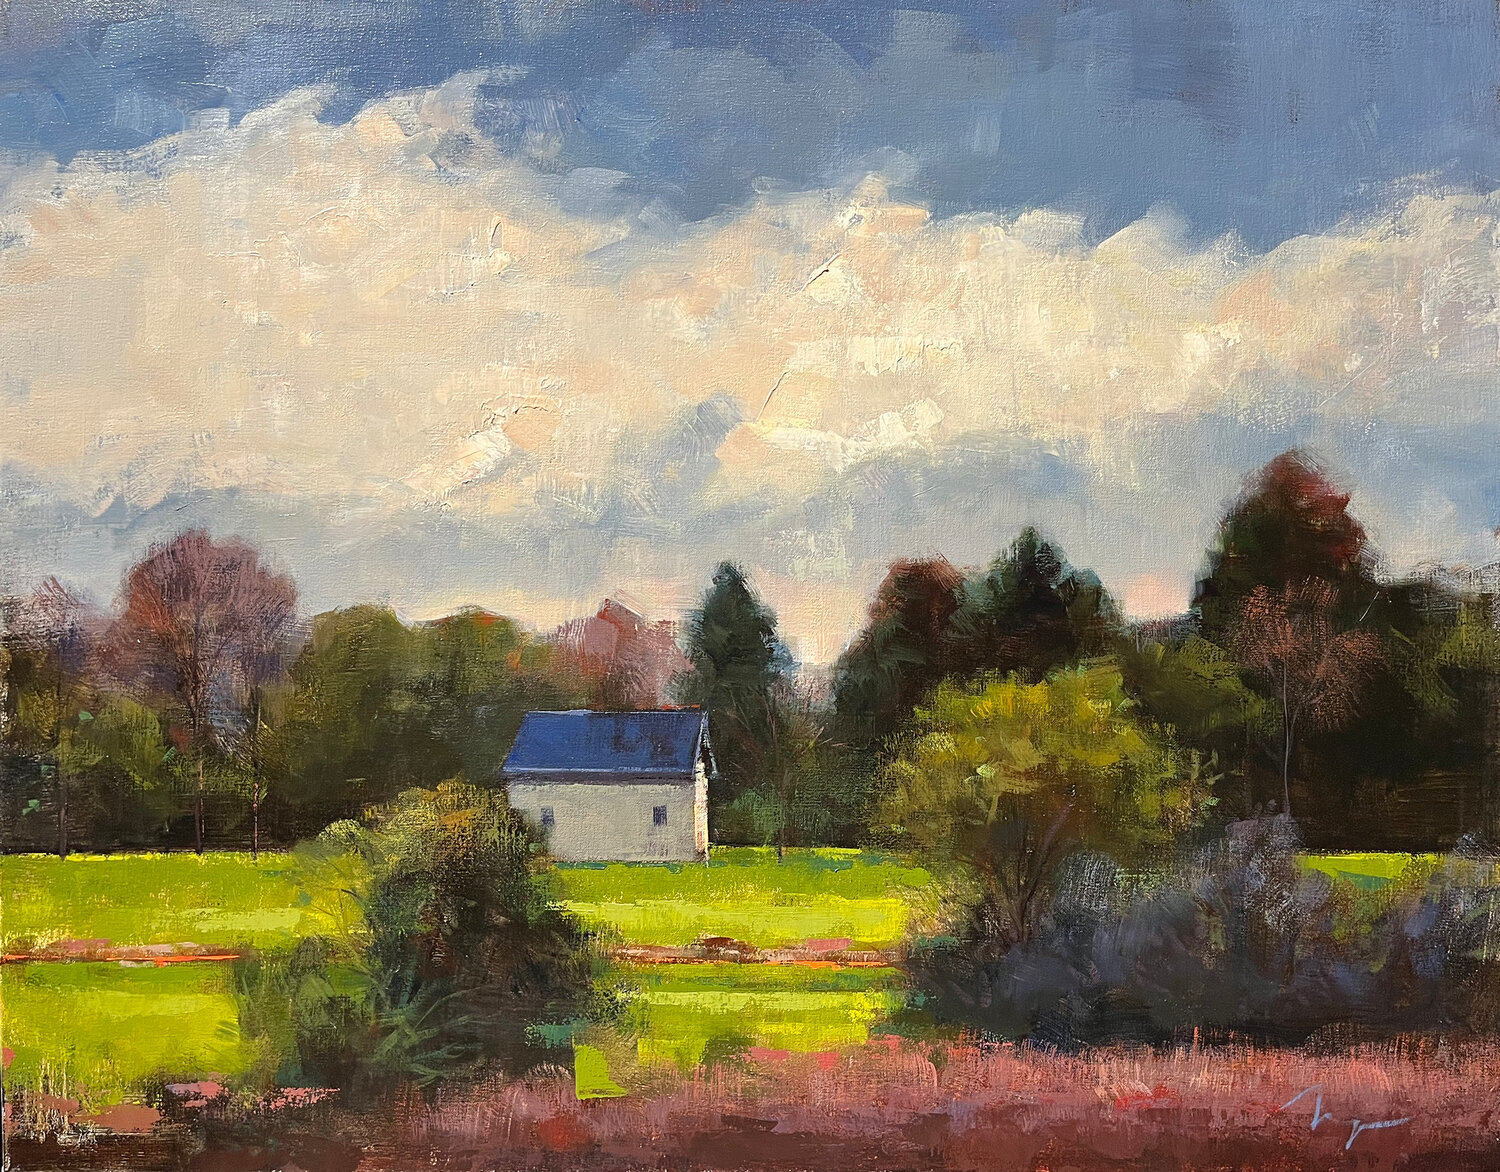 "Afternoon Light" is by George Thompson.